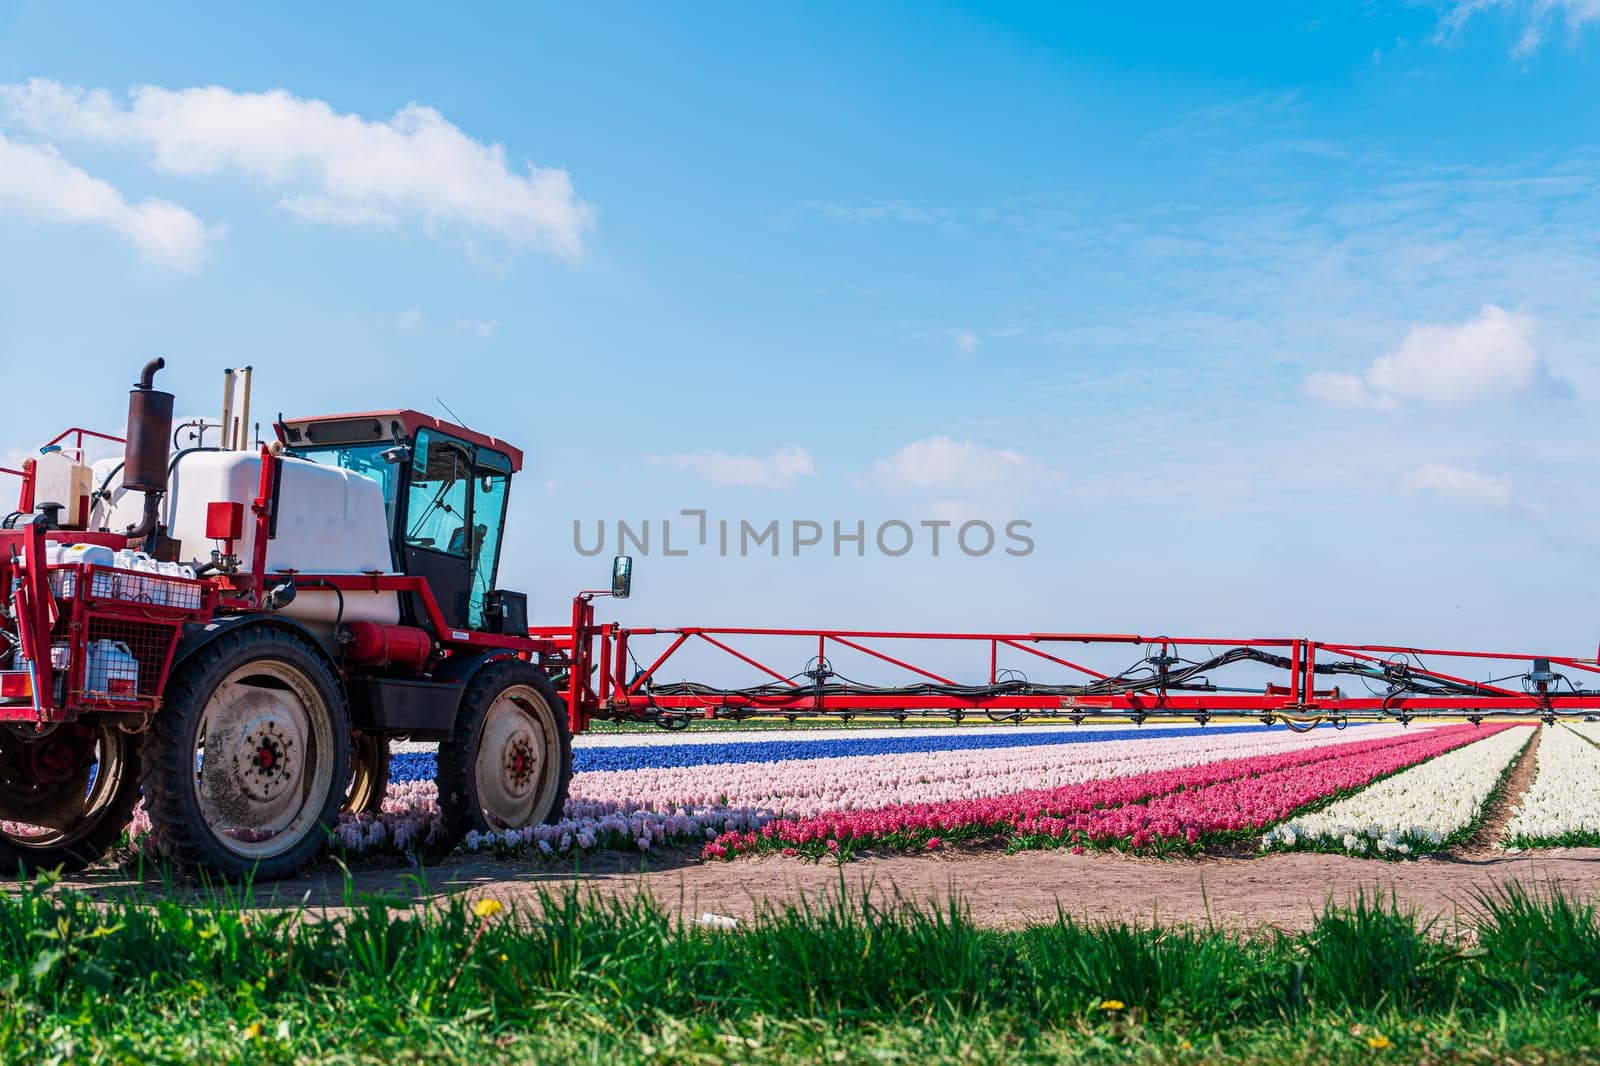 Protecting Flowers in Netherlands: Tractor Spraying Fields for Pest Control in Cultivation by PhotoTime